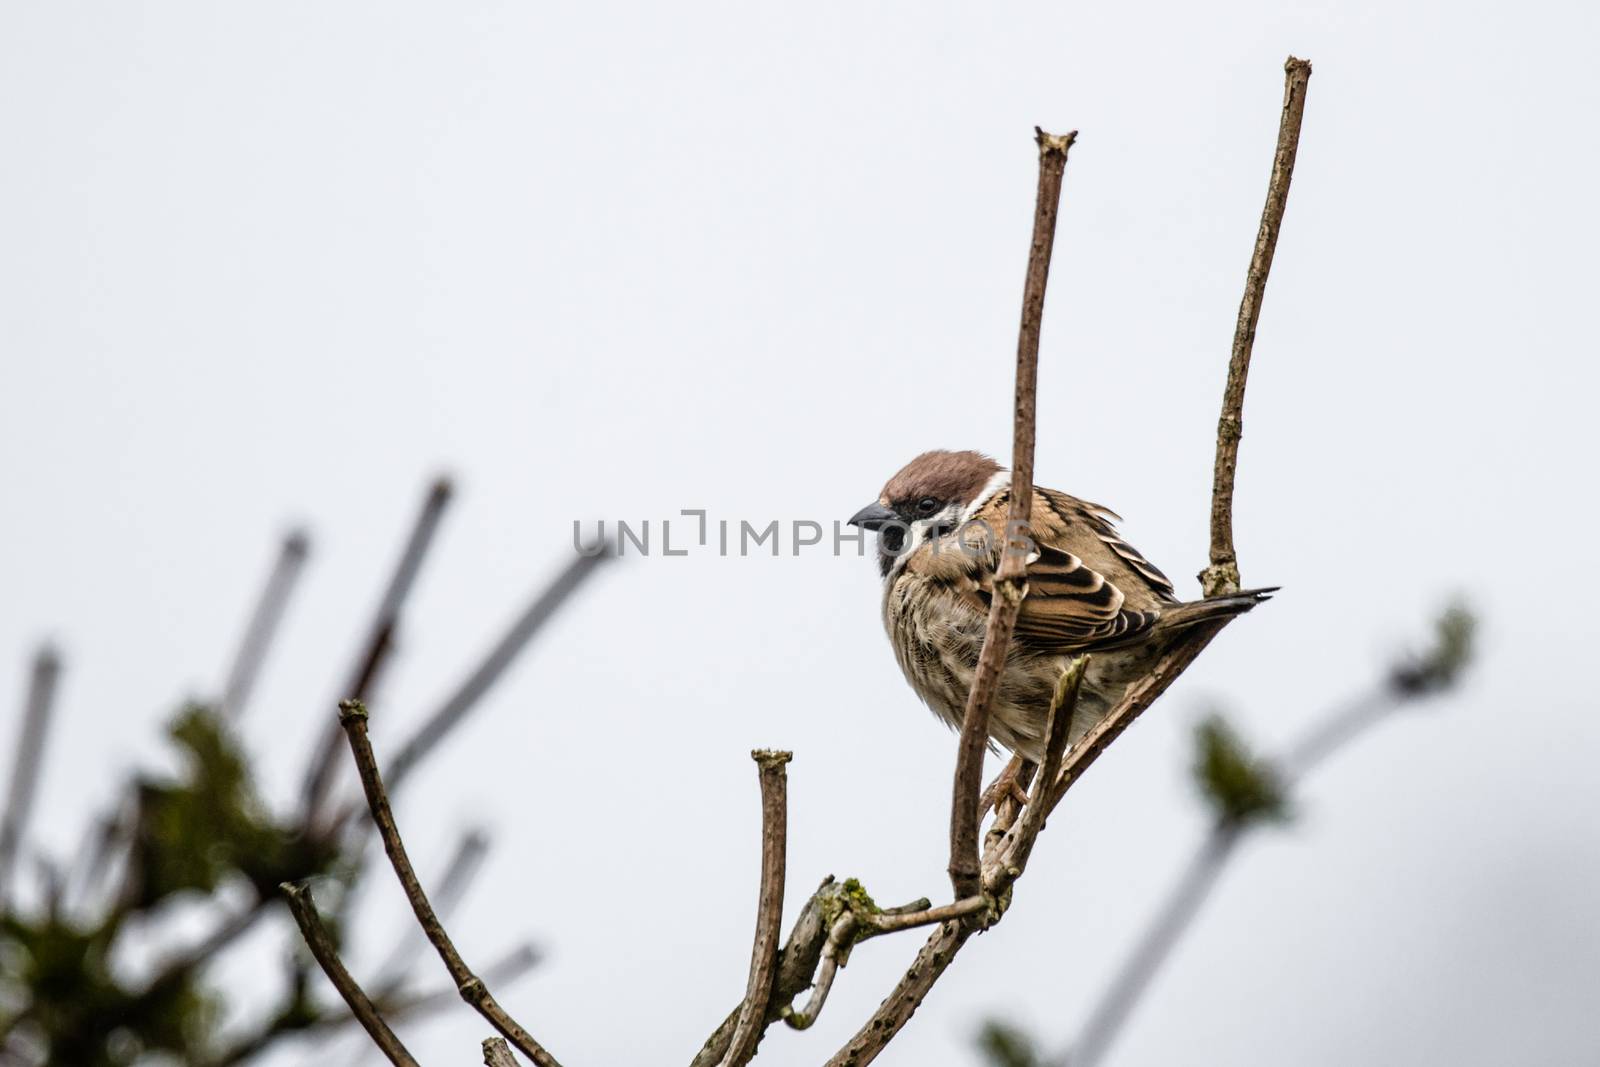 Sparrow on a twig at wintertime by Sportactive